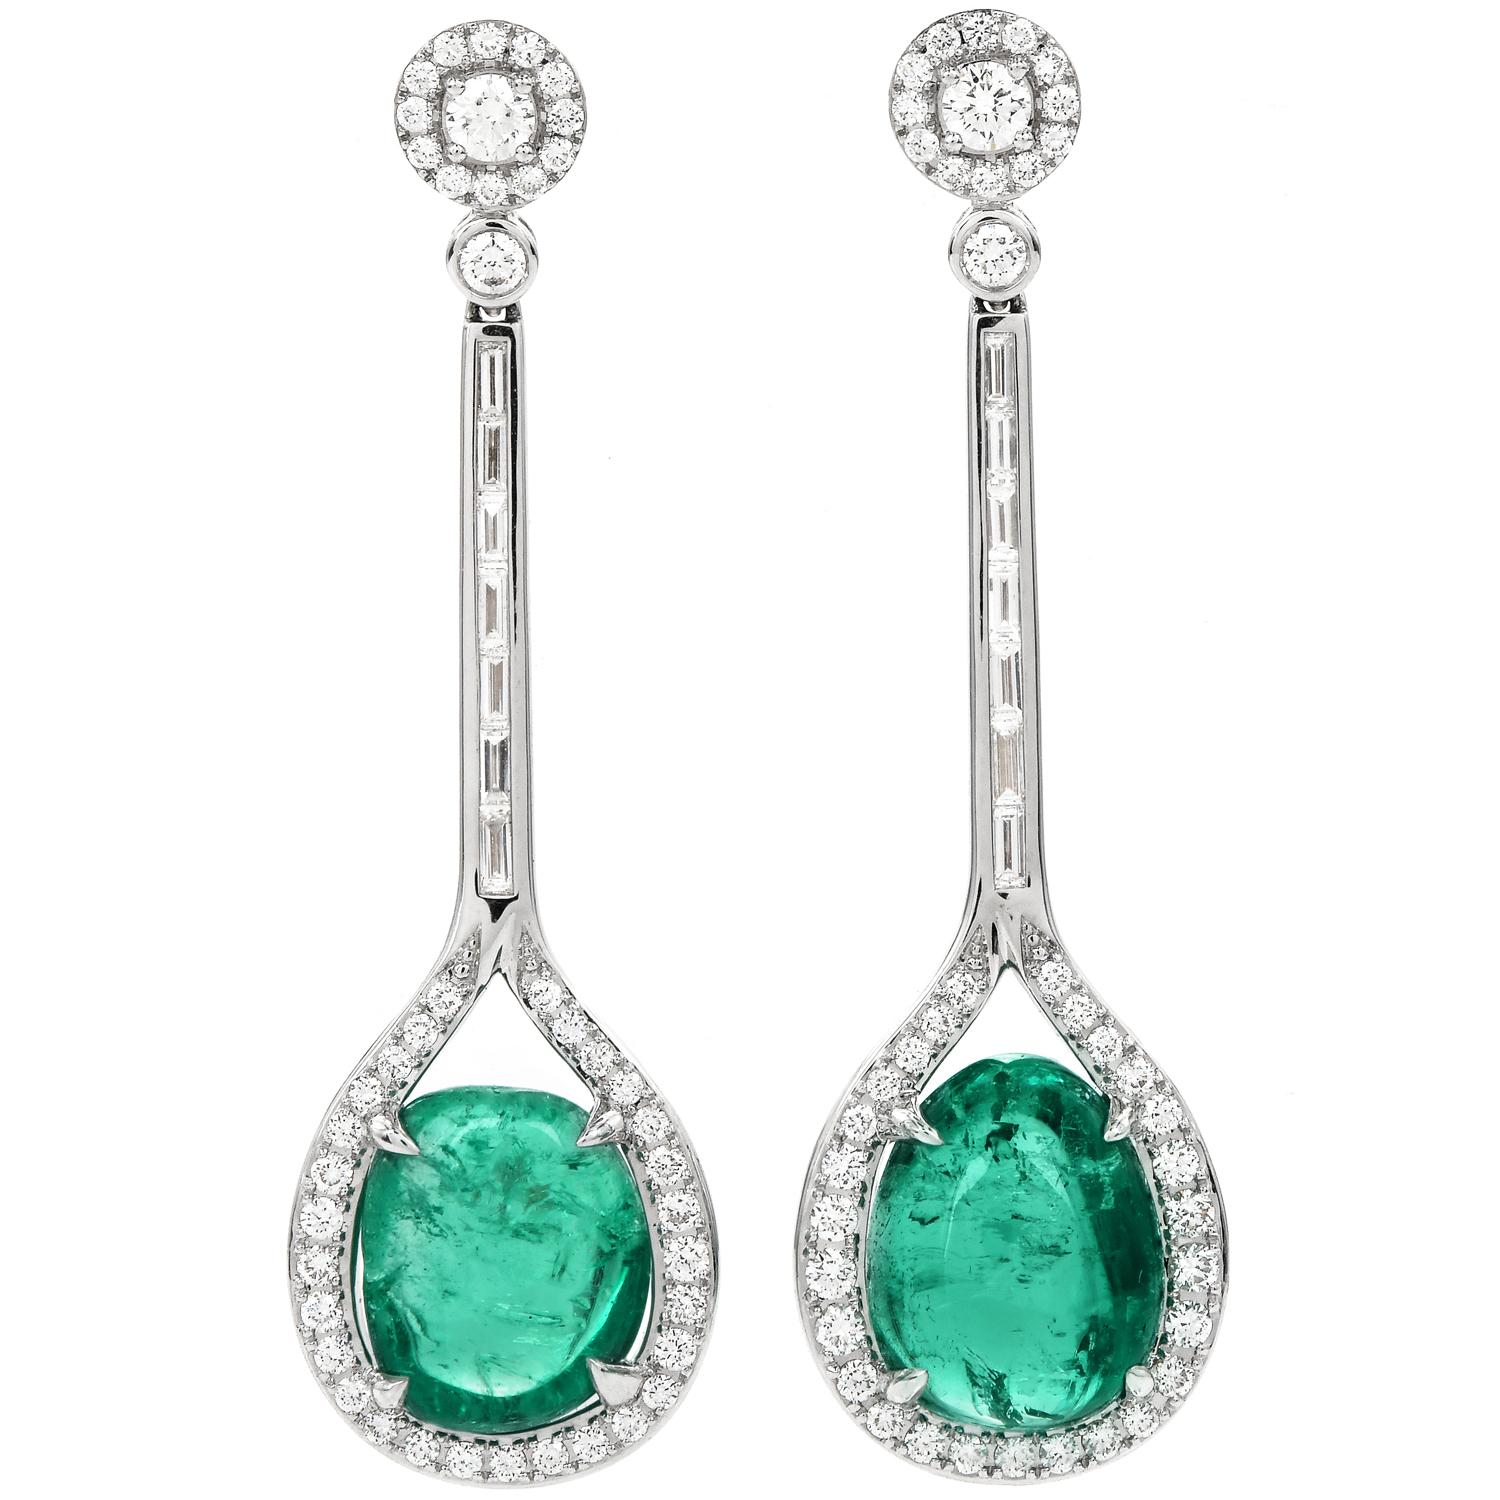 Double Cabochon Emerald Diamond 18k Gold Drop Dangle Earrings In Excellent Condition For Sale In Miami, FL